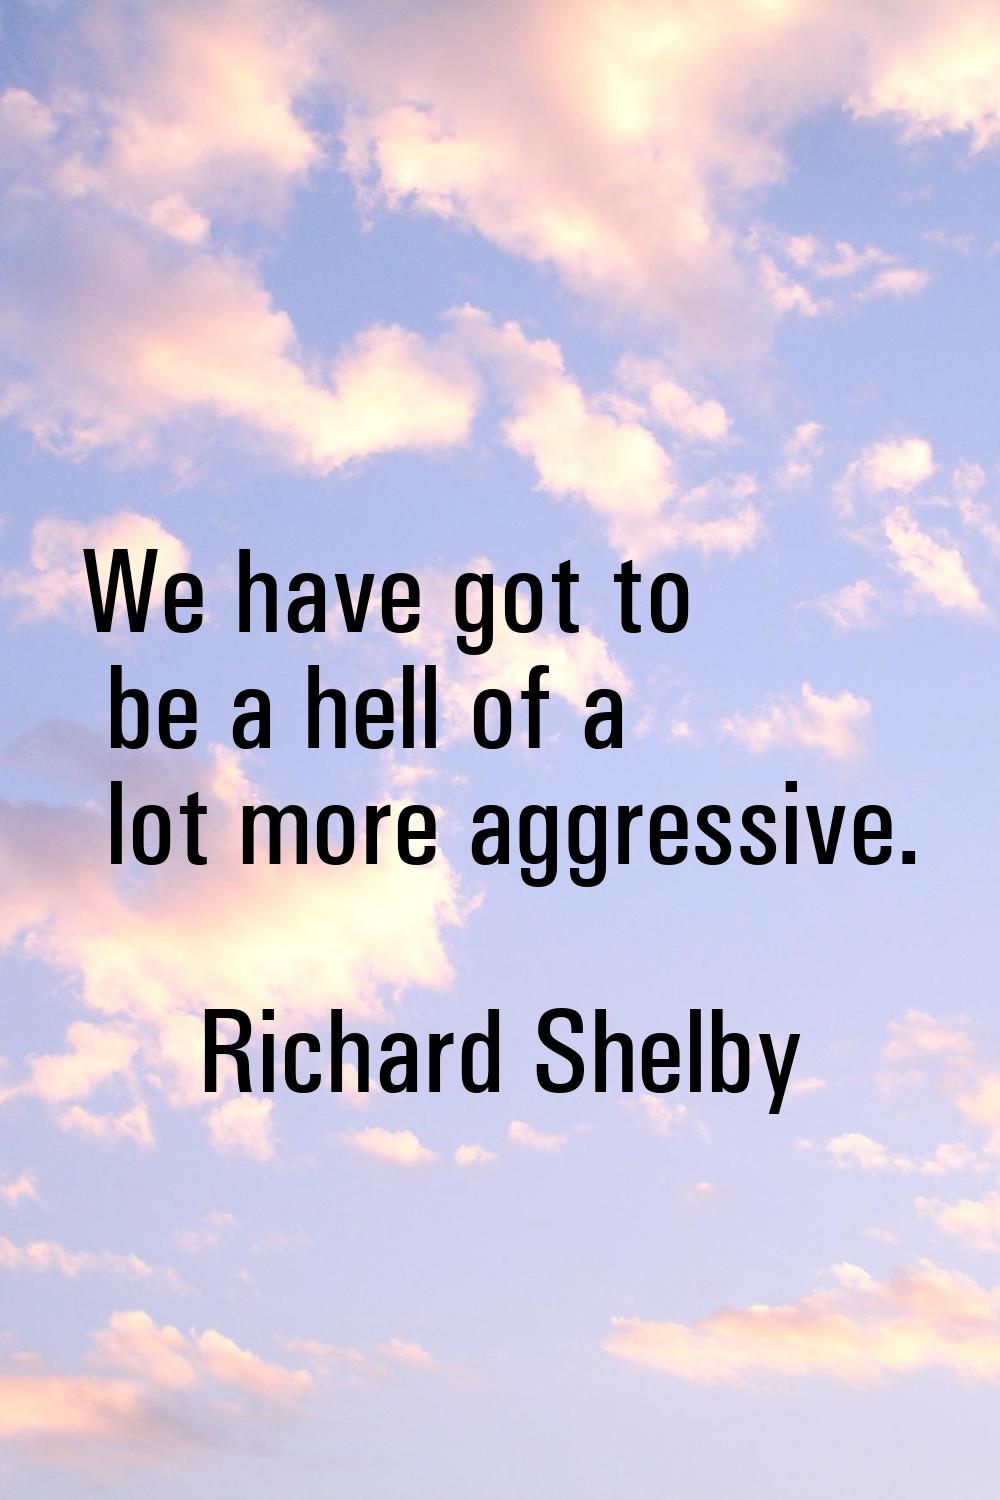 We have got to be a hell of a lot more aggressive.